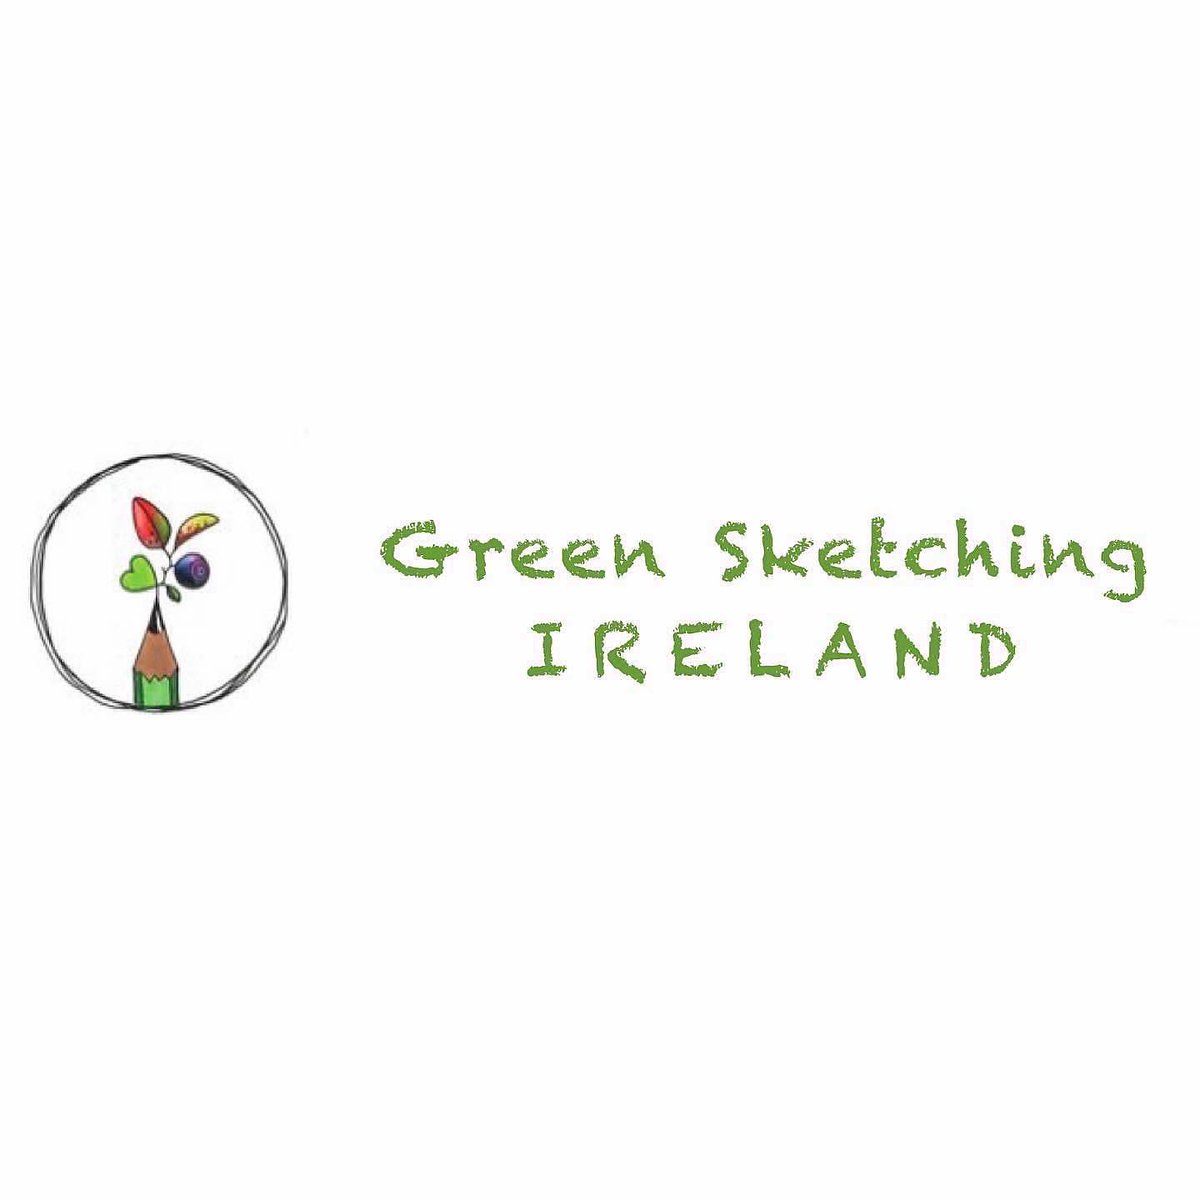 Tickets for my next Green Sketching workshop go on sale today. Taking place @cecas_ie Myross Wood House, Leap, on Saturday April 13th. Limited to ten participants. See poster below for details and QR code for tickets. Read anneharringtonreesdesigns.ie/pages/workshops for more information. Thank you💚